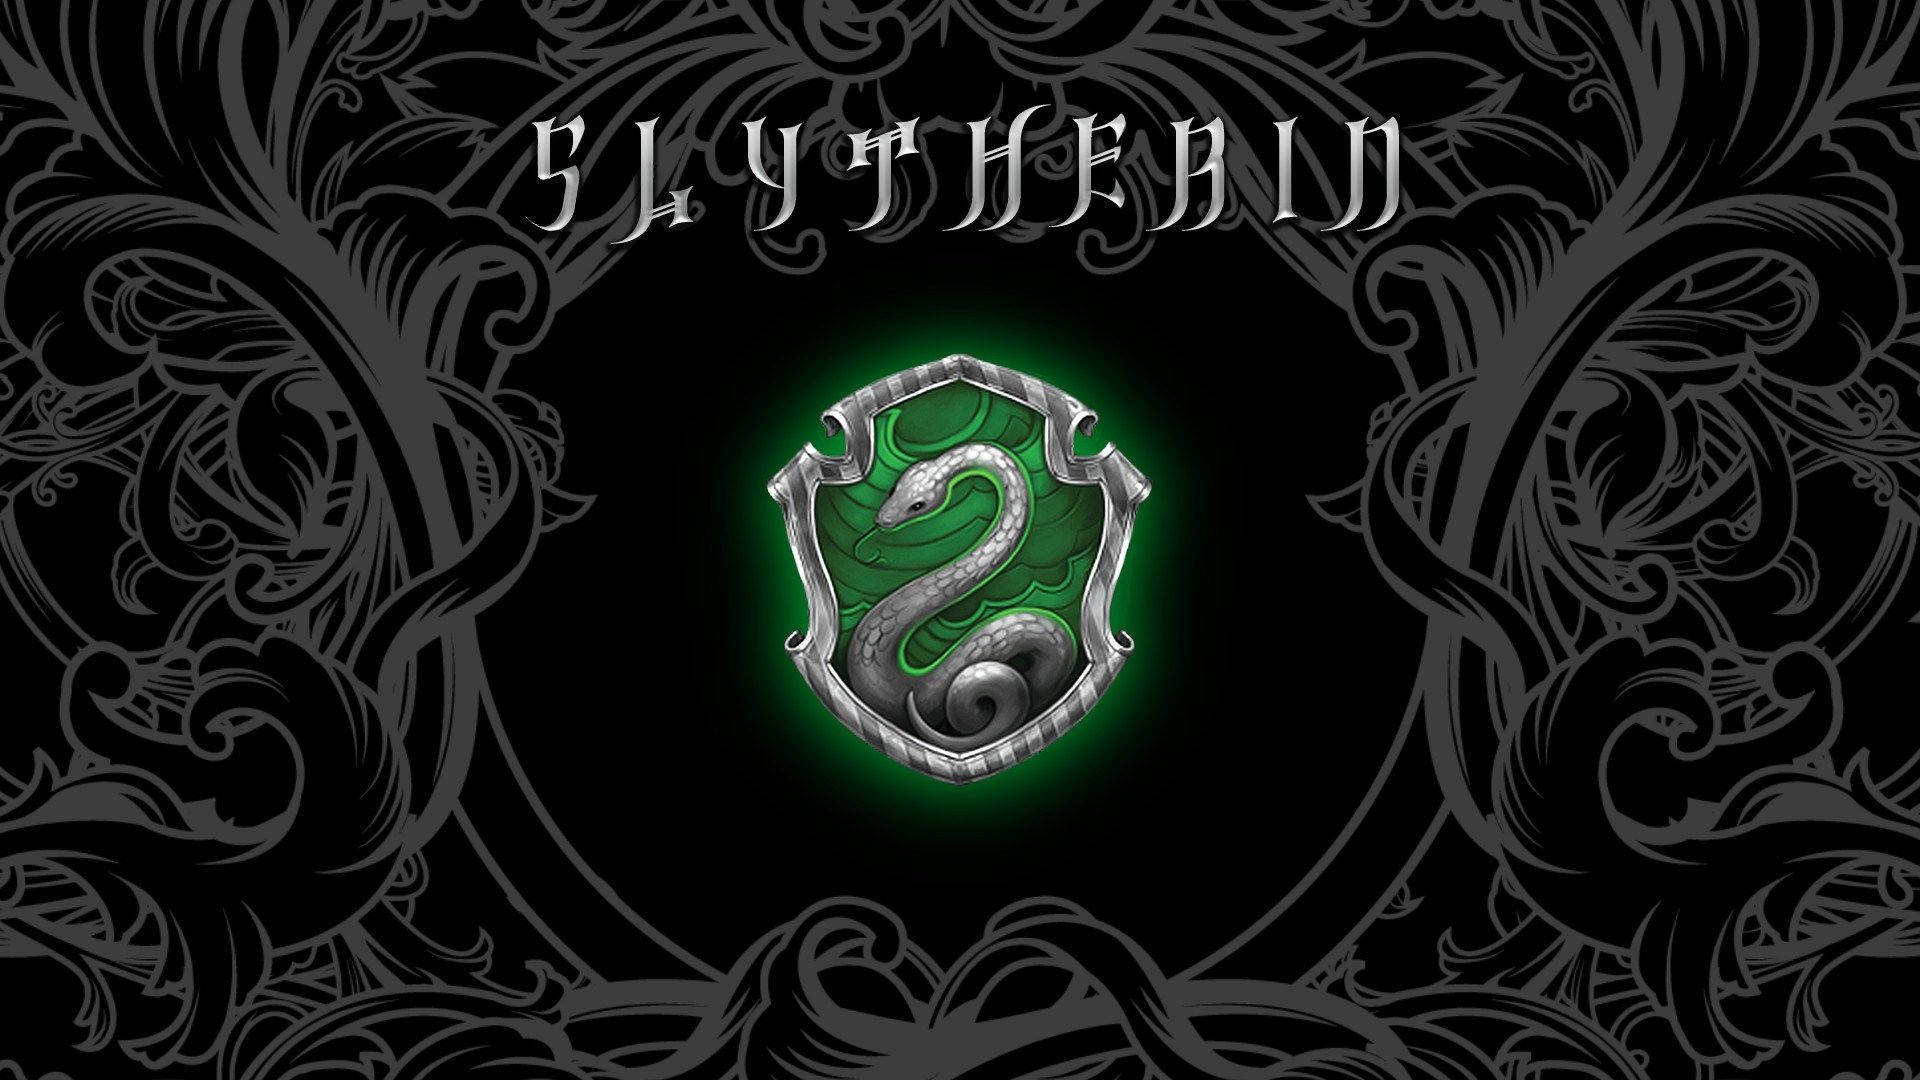 Slytherin College Wallpapers - Wallpaper Cave